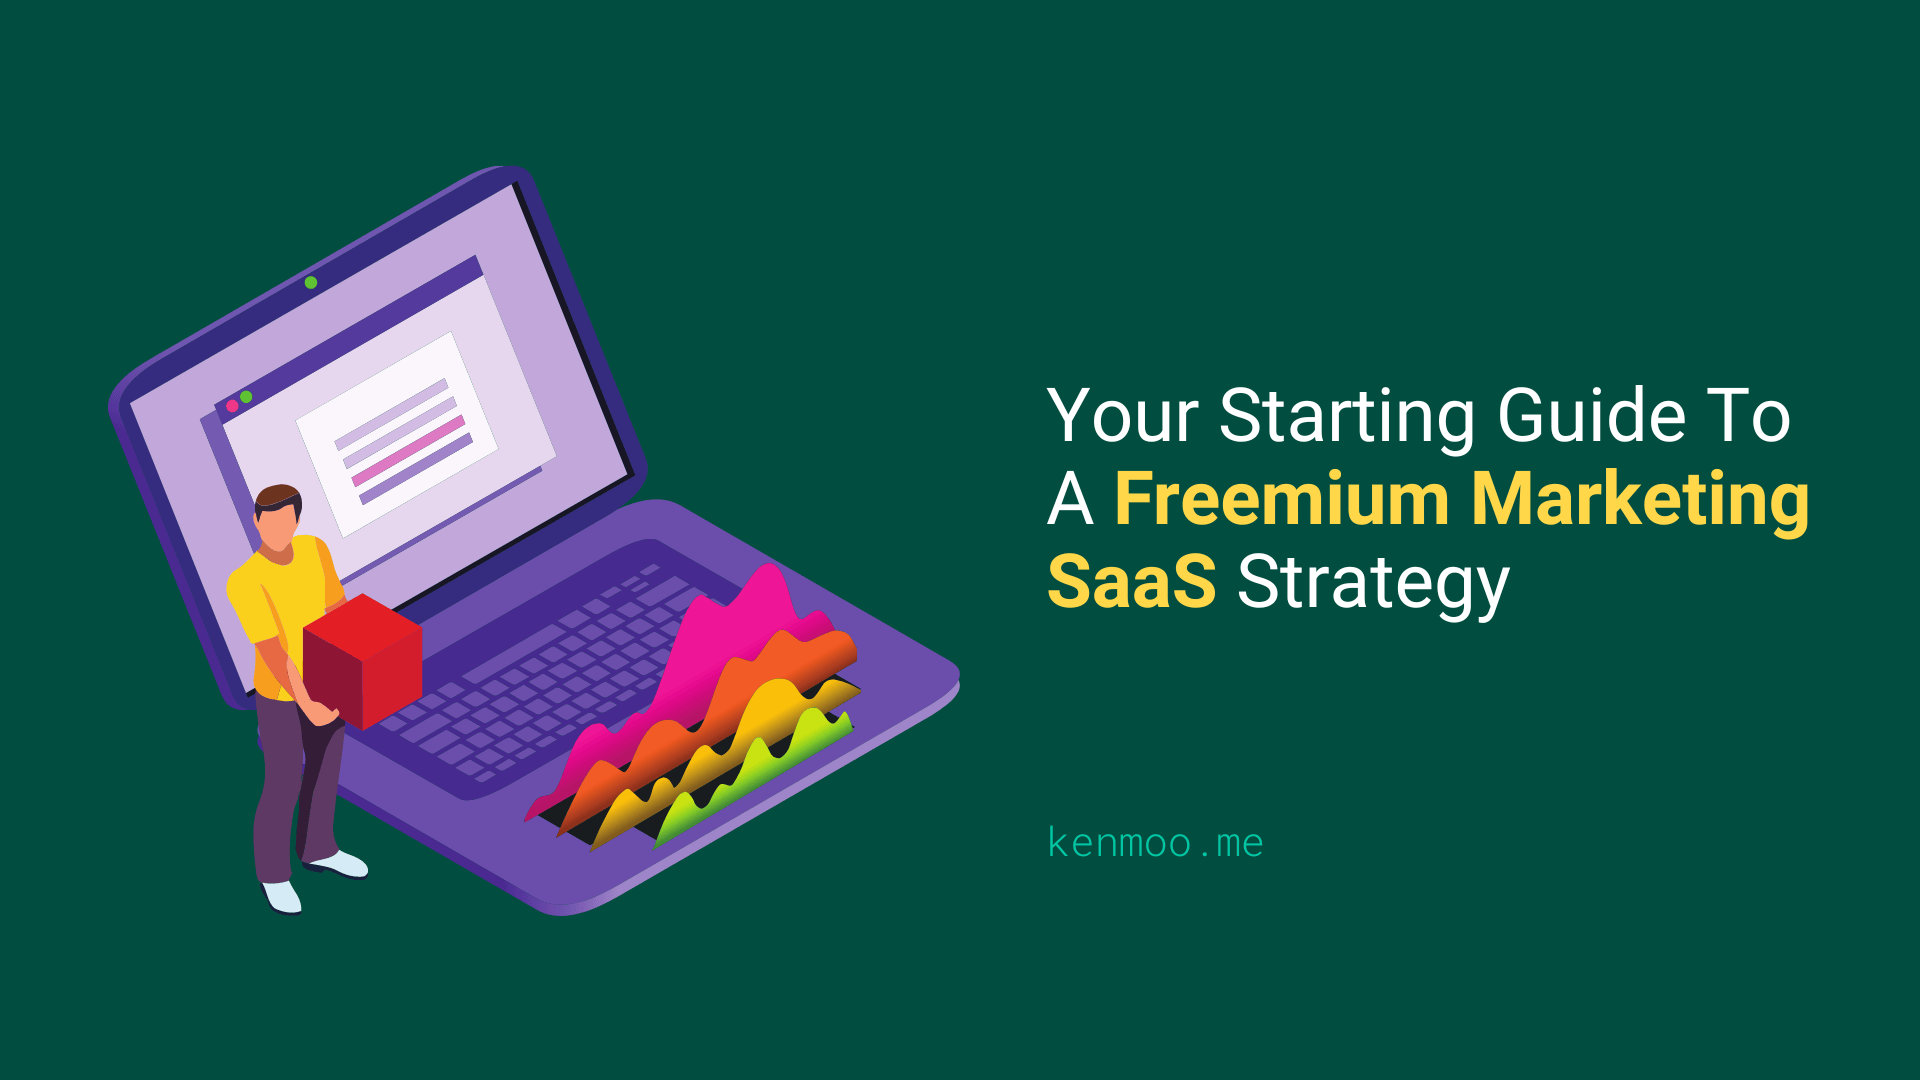 Your Starting Guide To A Freemium Marketing SaaS Strategy